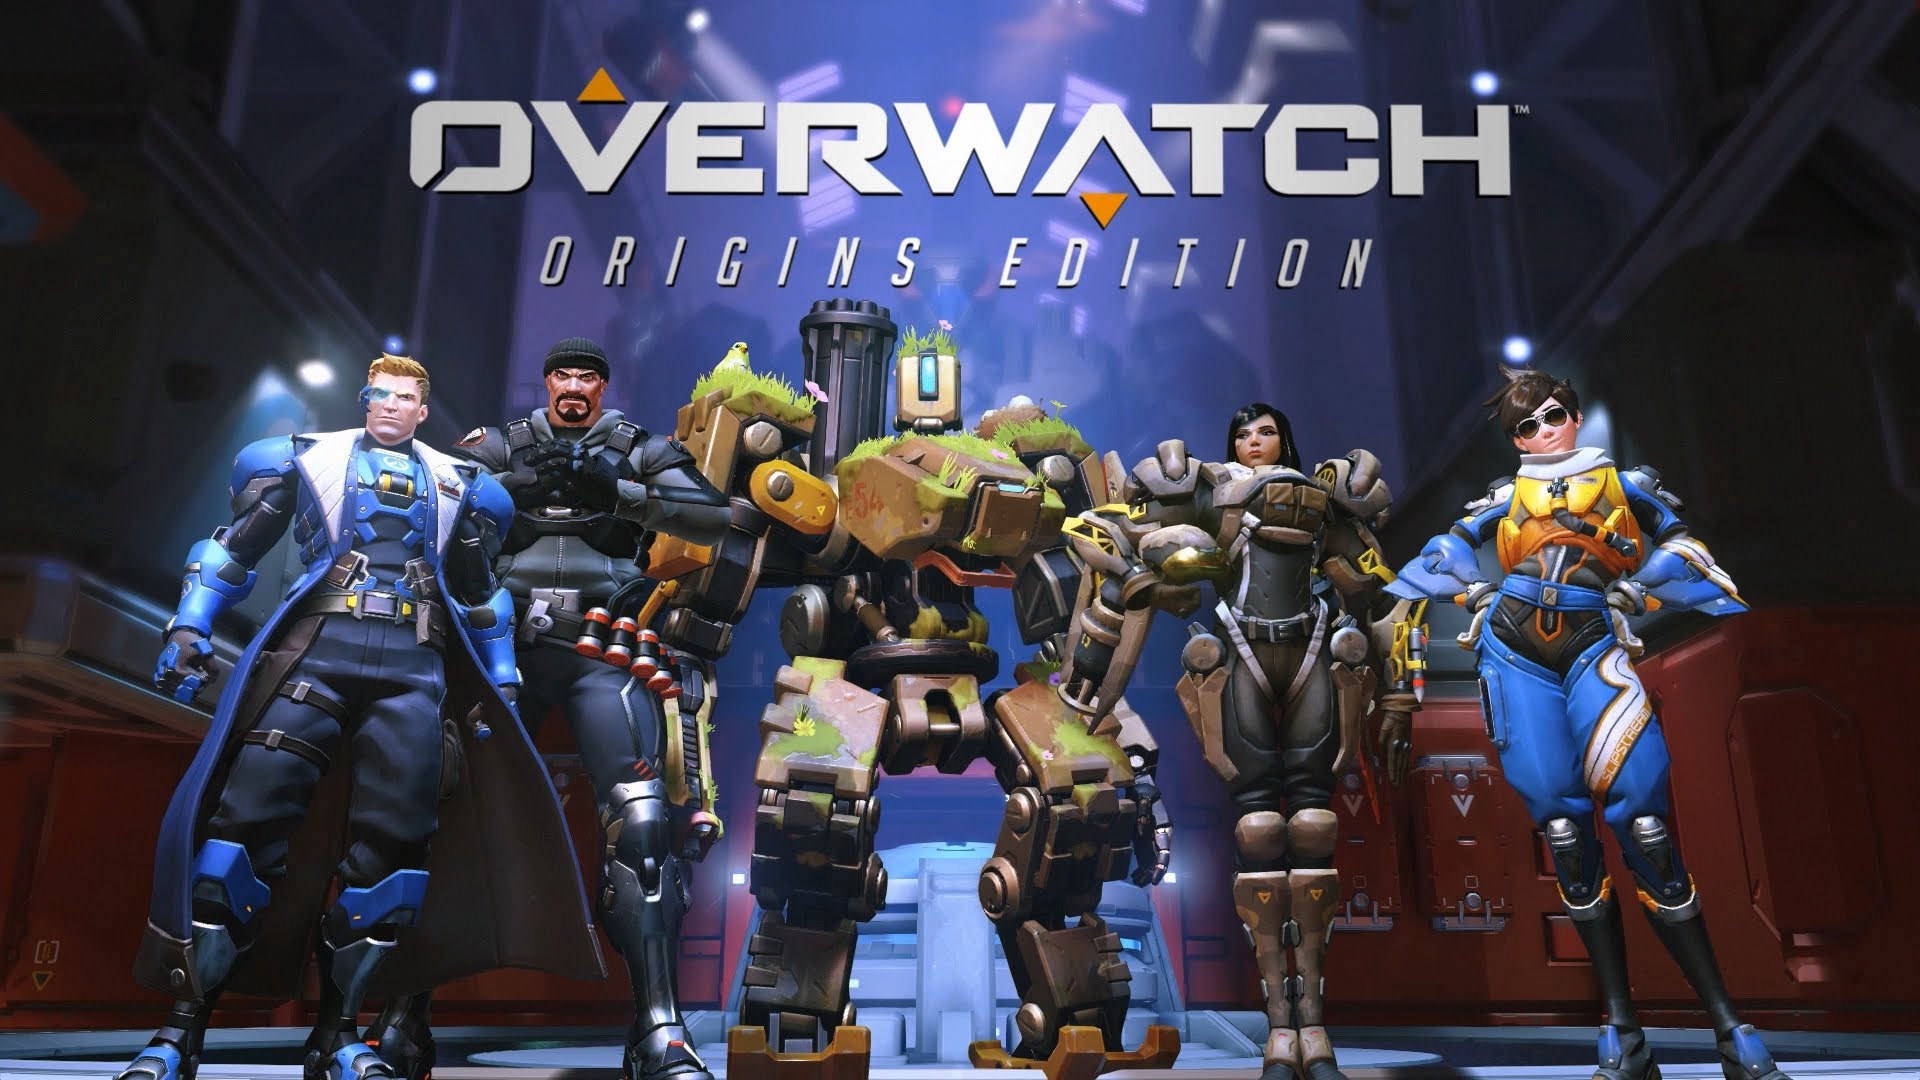 Blizzcon 2015: Overwatch Is Not Free To Play, Also Available For Consoles